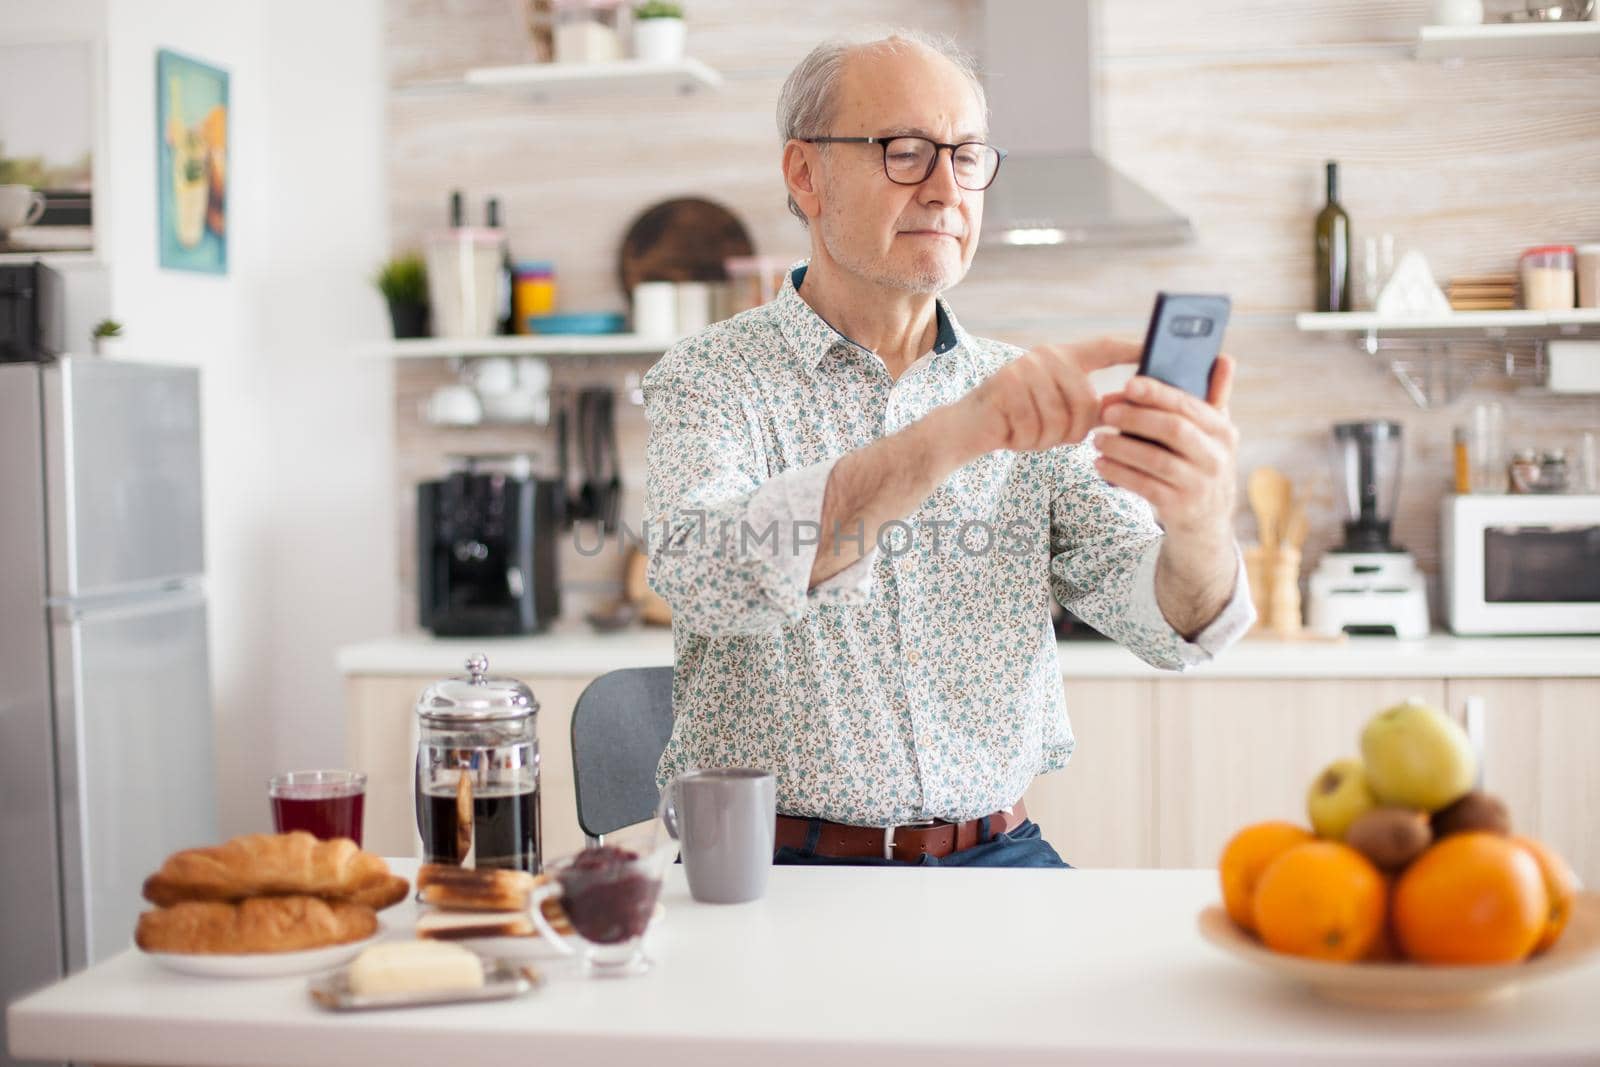 Happy senior man browsing the internet on smartphone during breakfast in kitchen. Elderly person using internet online chat technology video webcam making a video call connection camera communication conference call